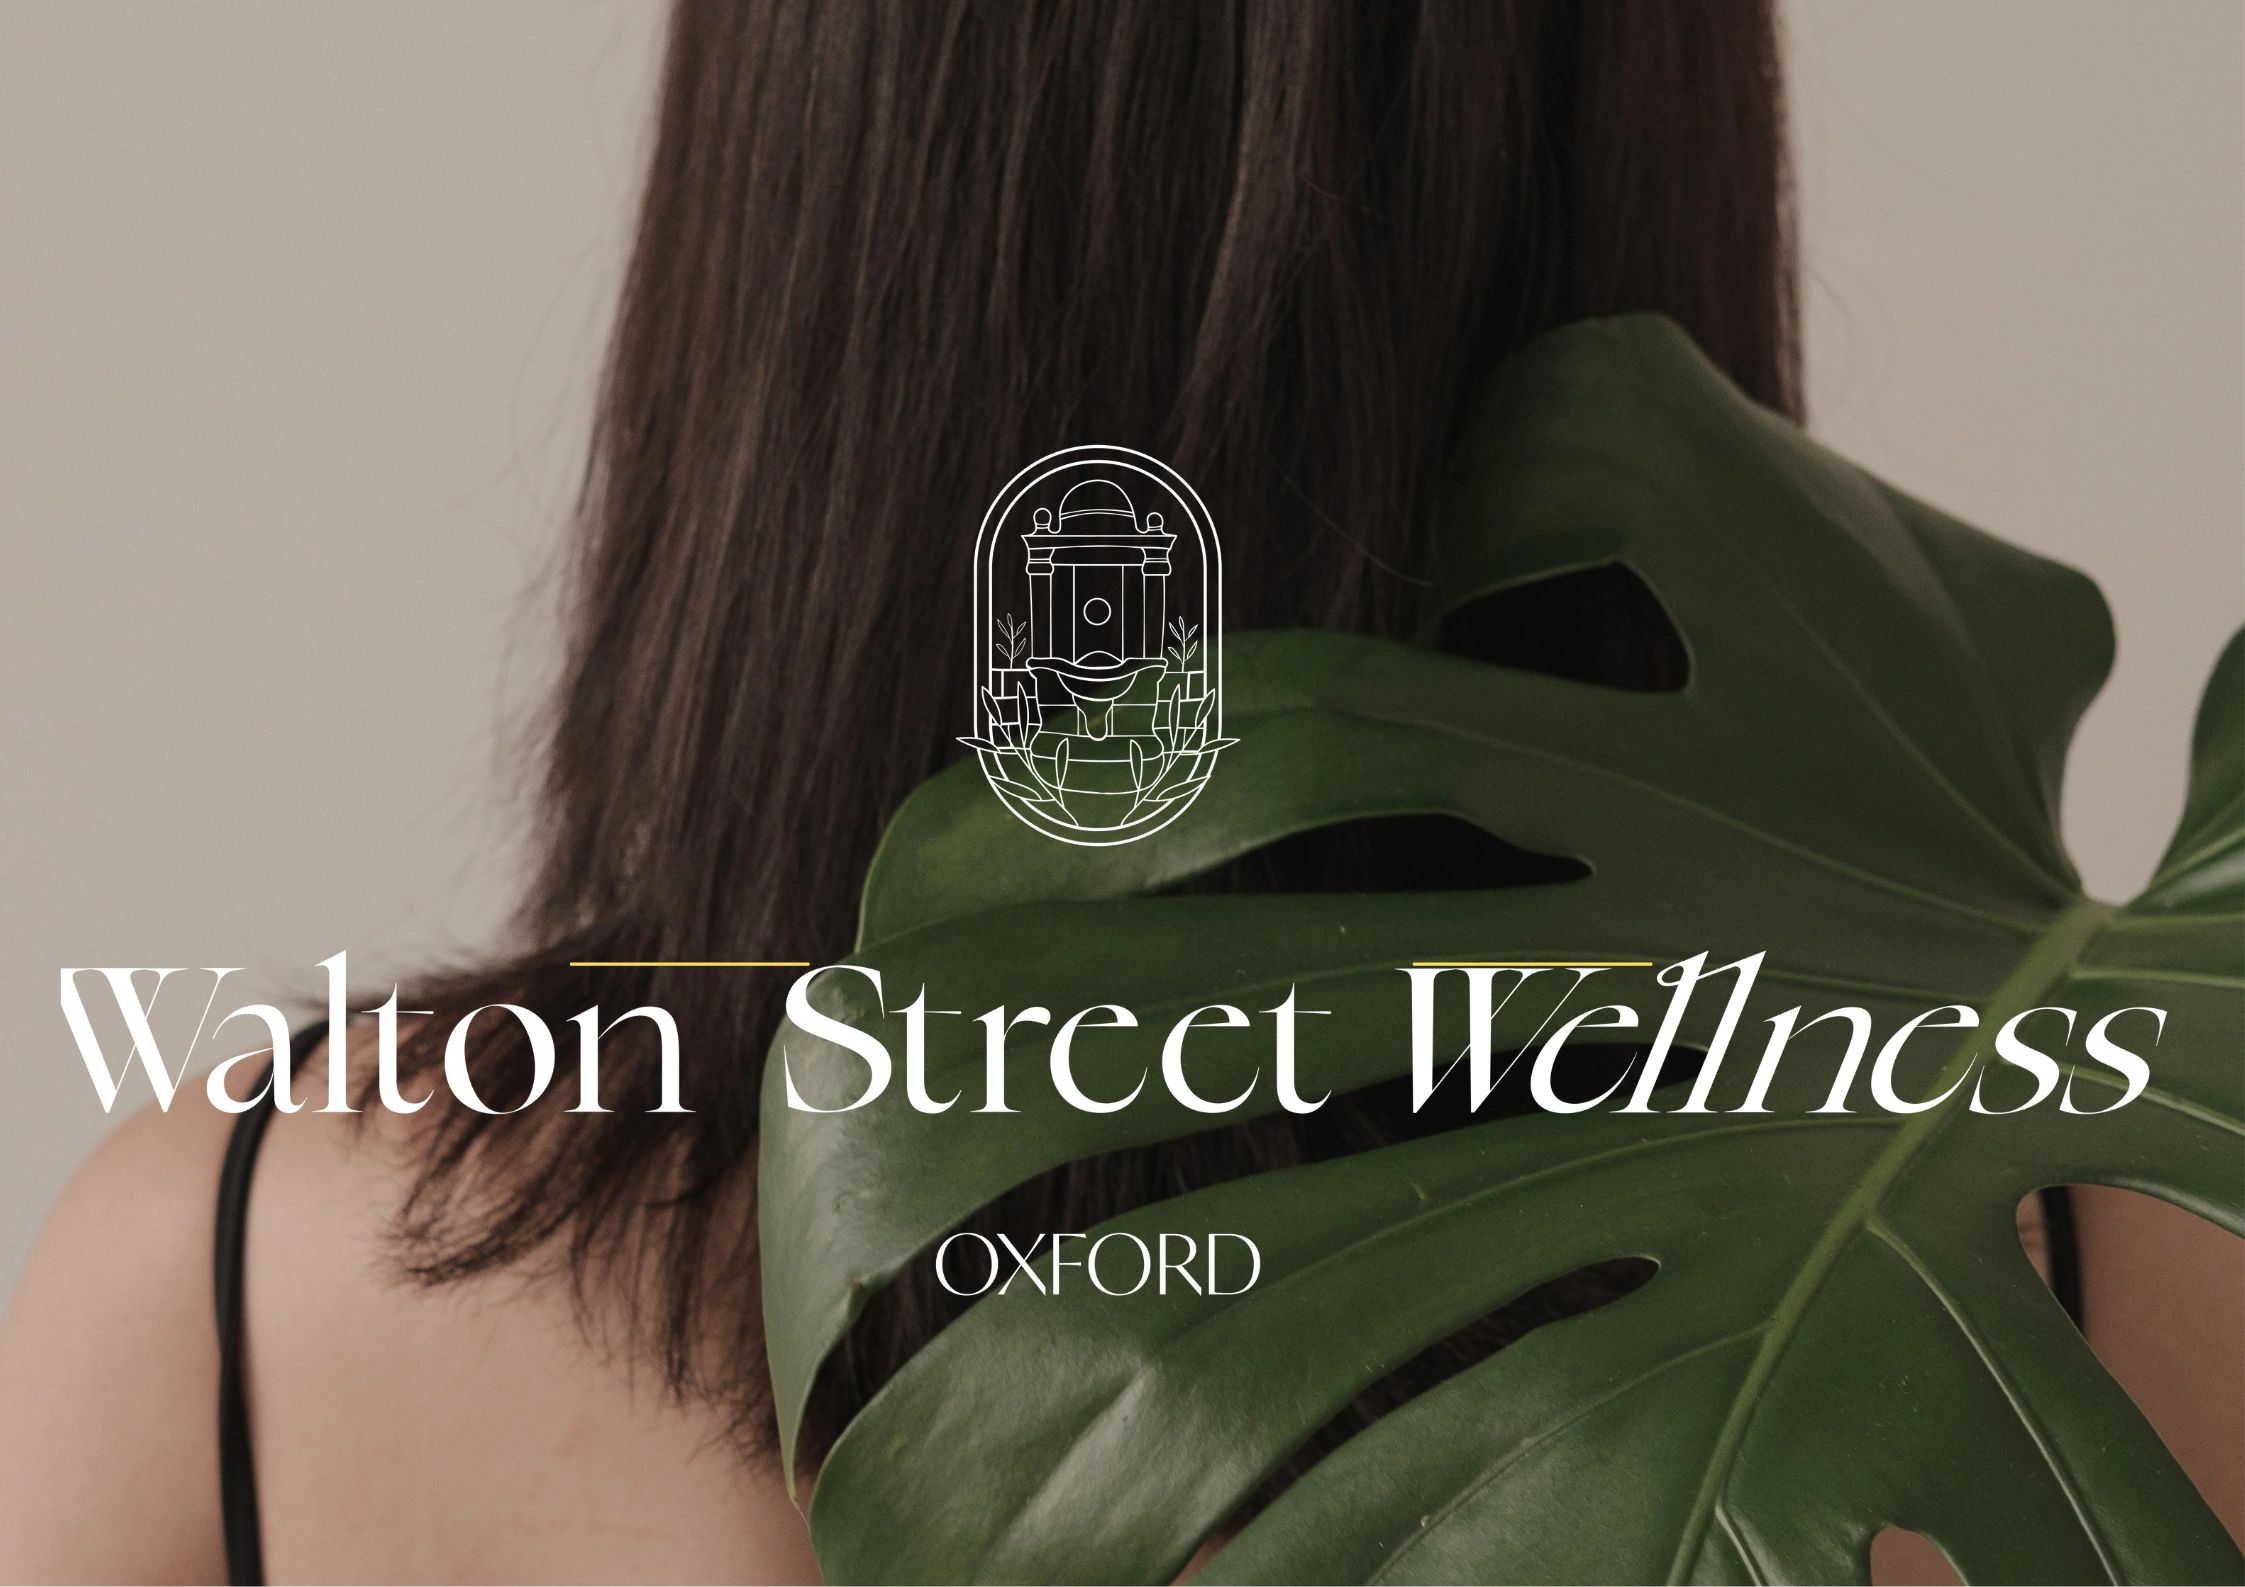 Walton street wellness Oxford picture and logo